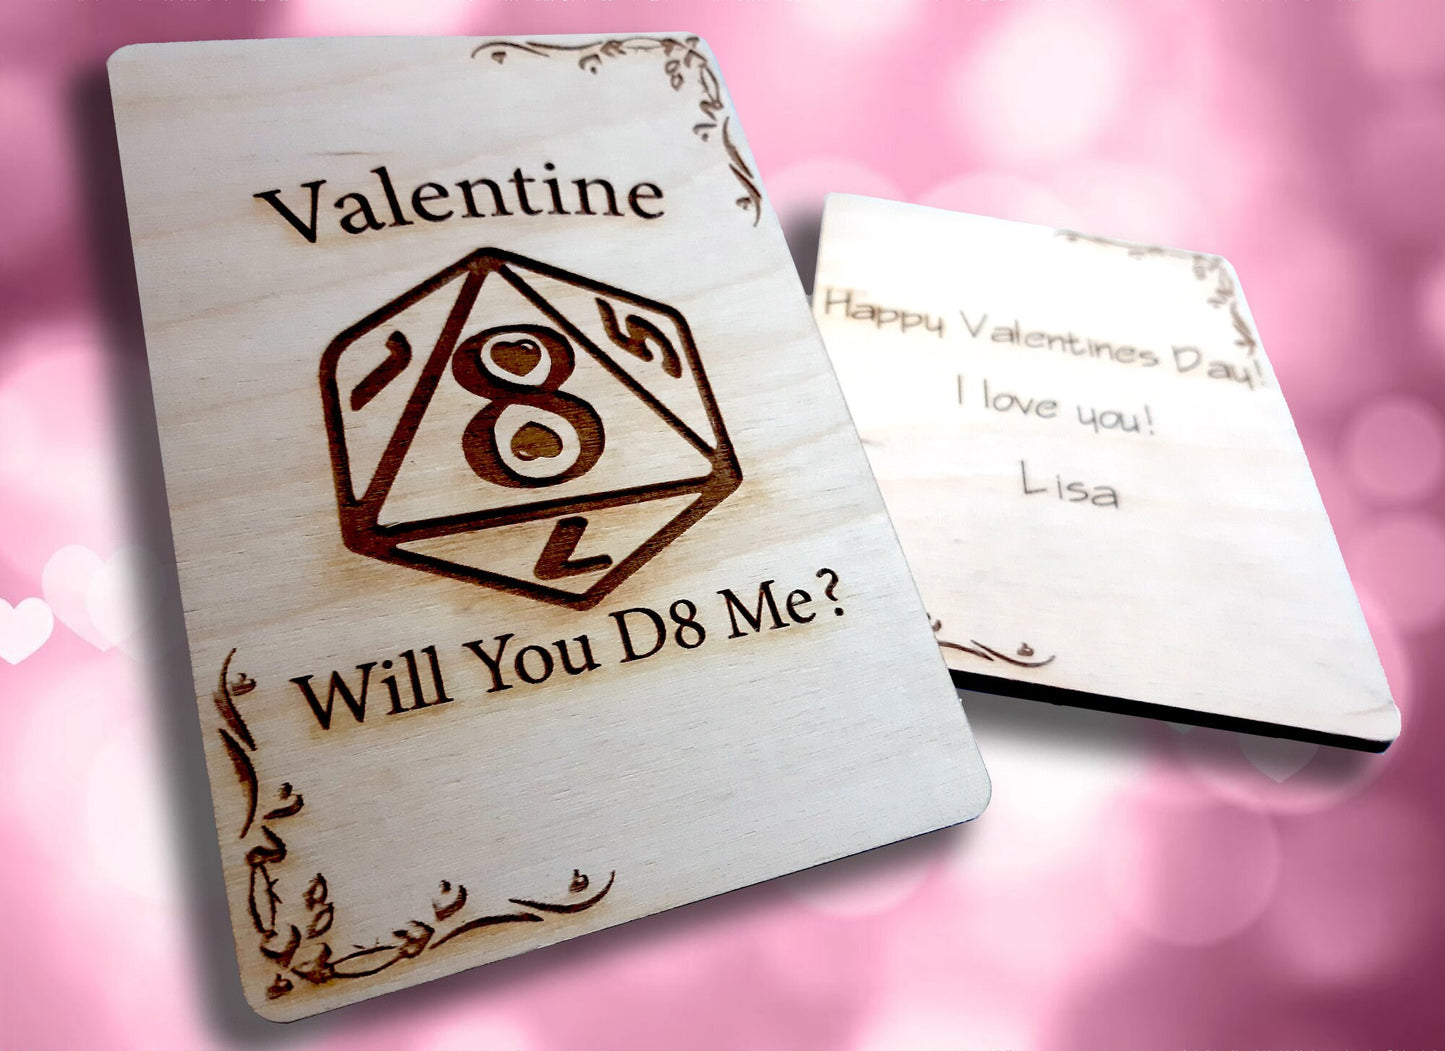 Valentine Card - D8 Me RPG Gaming Clever VDay card, engraved wood, gamer gift, rpg, role-playing games d&d dnd Date